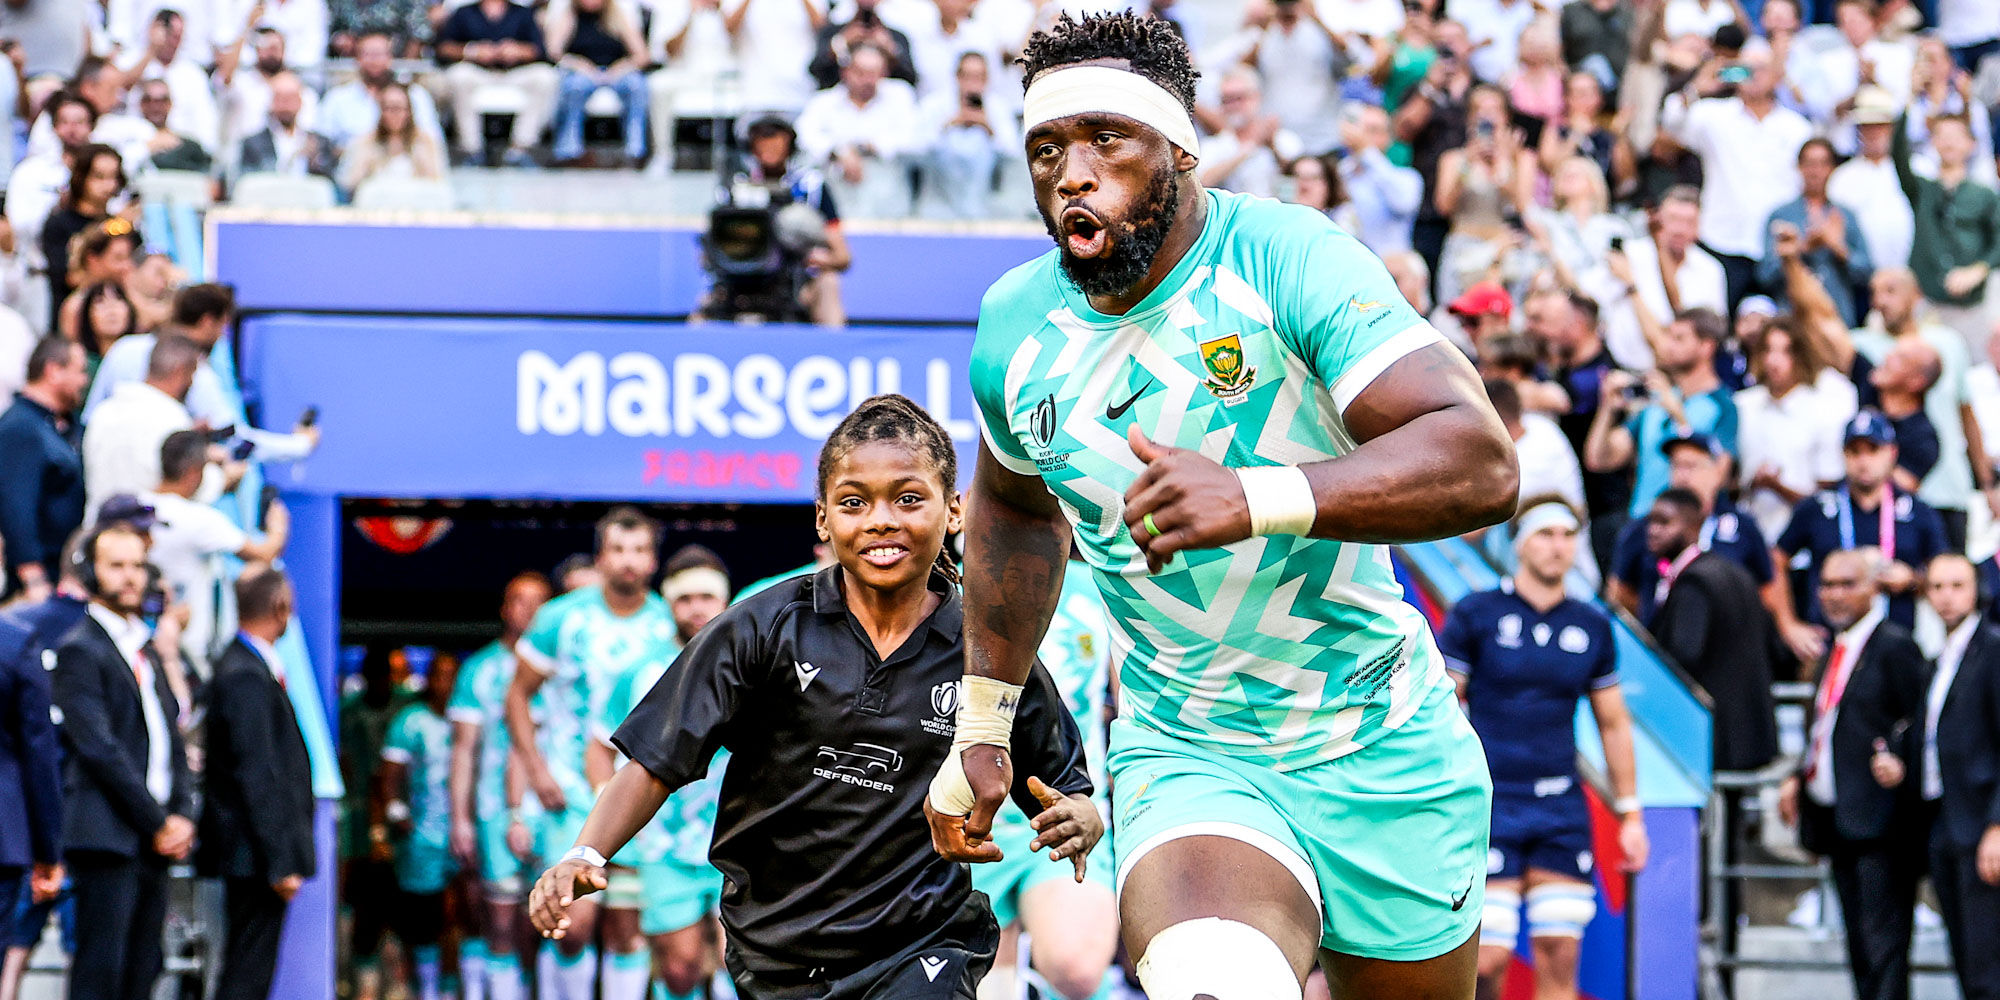 Siya Kolisi will lead the Boks for the 50th time in a Test on Sunday.